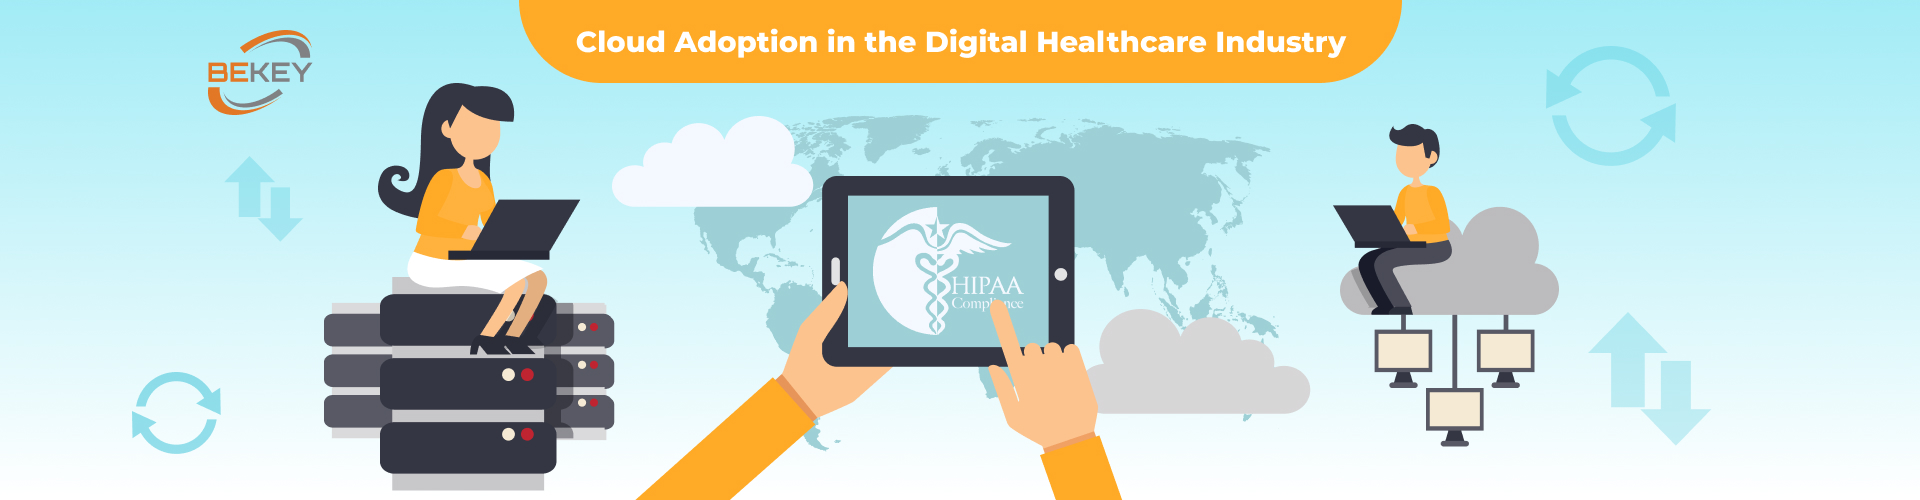 Cloud adoption in the digital healthcare industry 